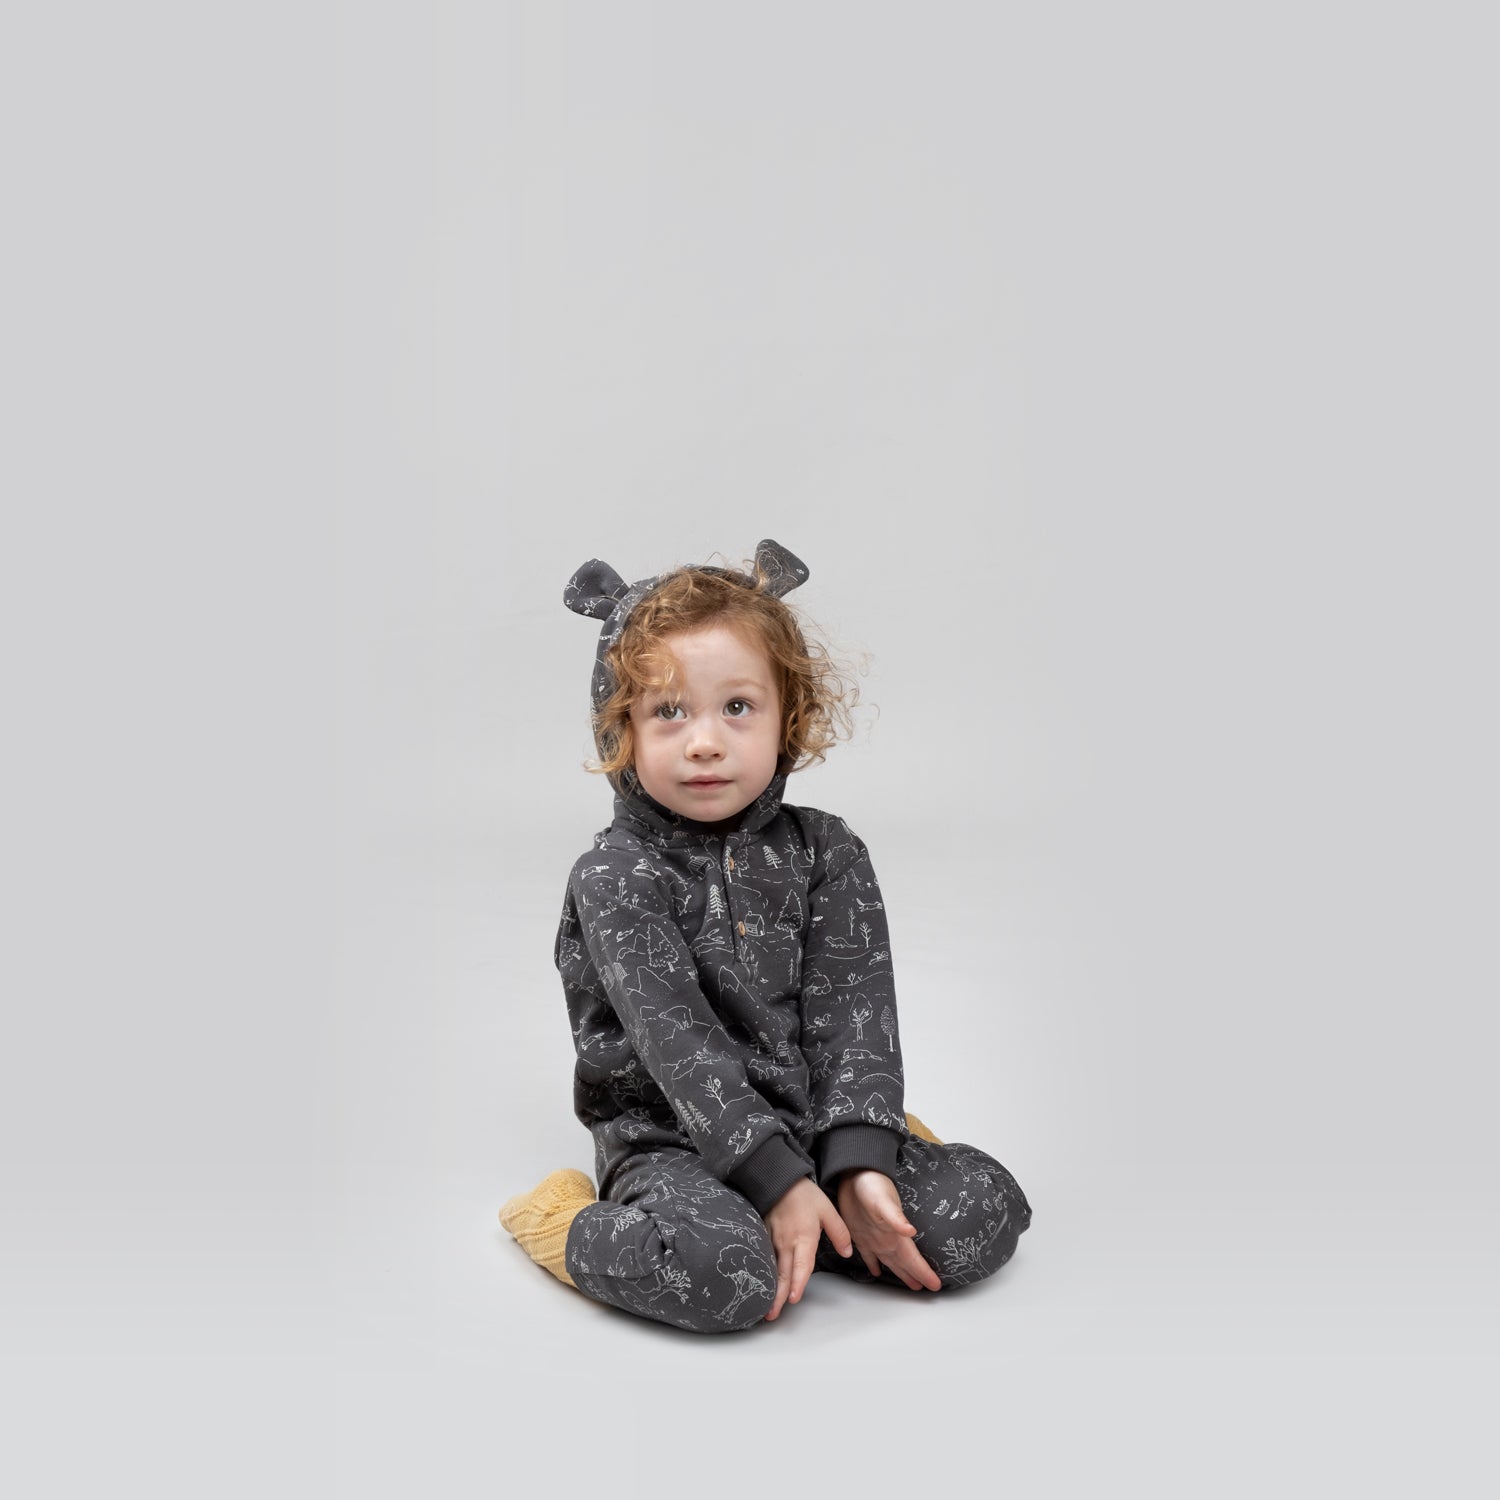 'the story' dark shadow bear french terry jumpsuit